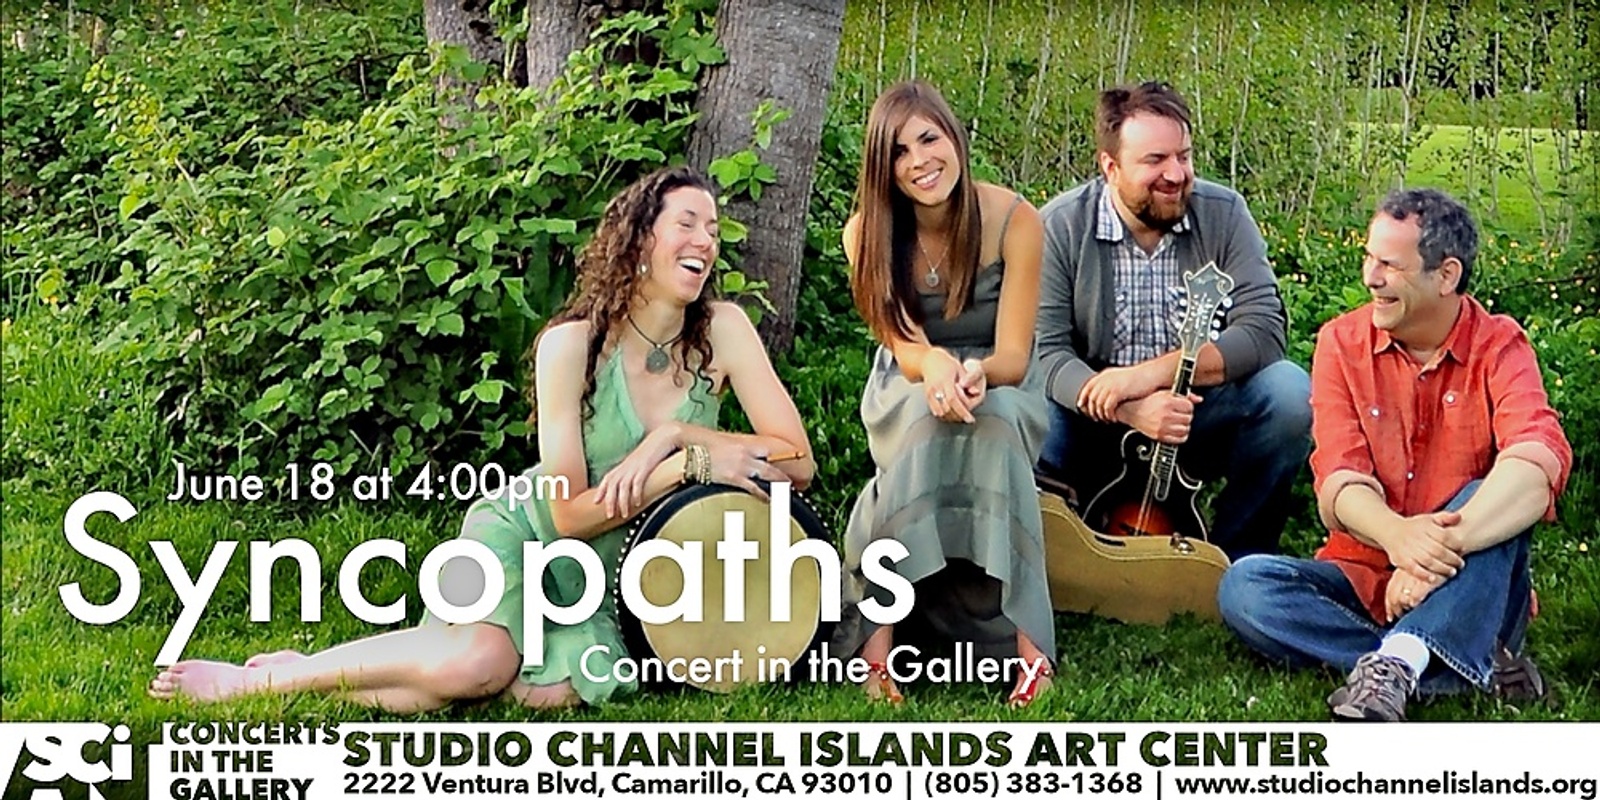 Concert in the Gallery: Syncopaths